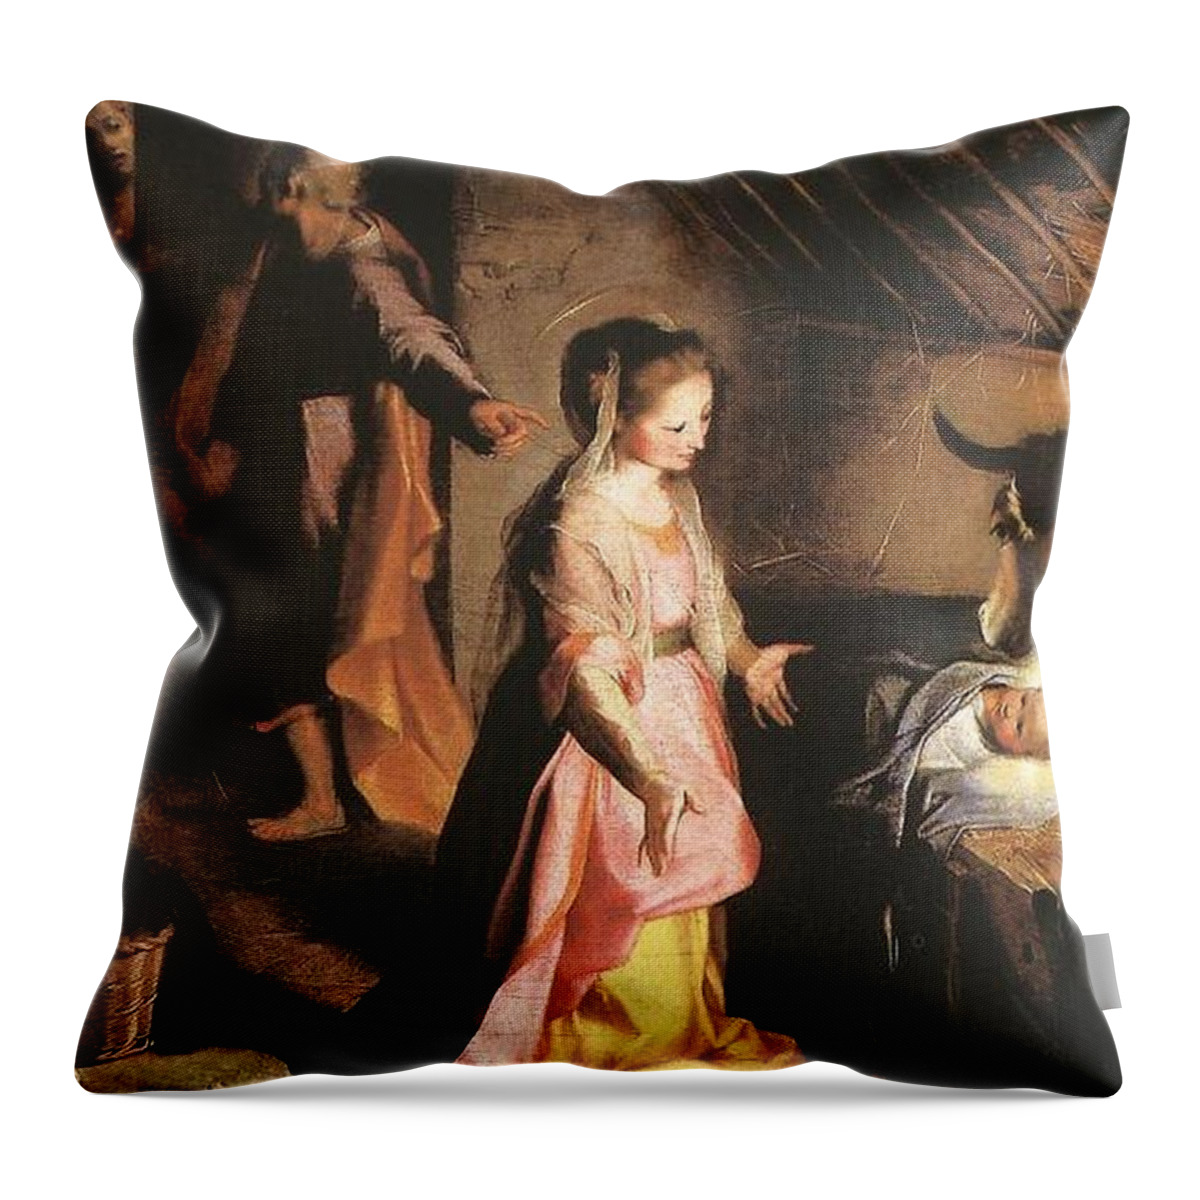 Nativity Throw Pillow featuring the painting The Nativity by Federico Barocci